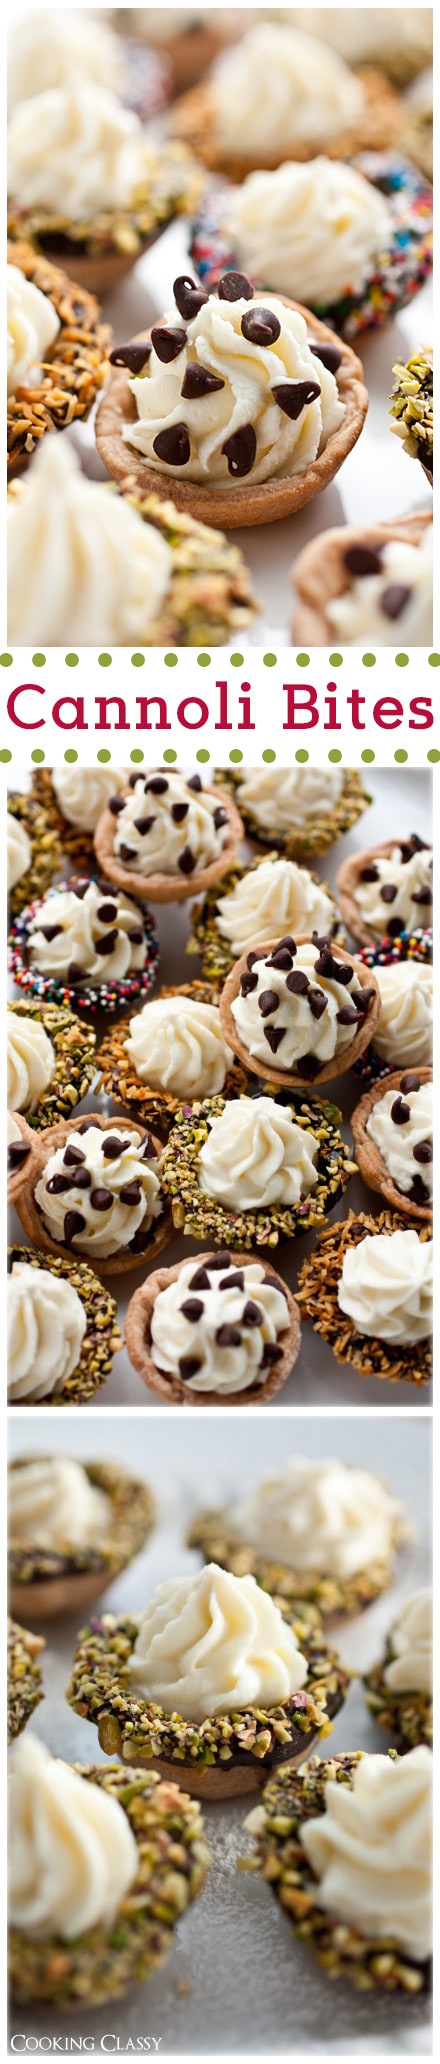 Cannoli Bites Mini Desserts Recipe via Cooking Classy - The BEST Bite Size Dessert Recipes - Mini, Individual, Yummy Treats, Perfectly Pretty for Your Baby and Bridal Showers, Birthday Party Dessert Tables and Holiday Celebrations! #bitesizedesserts #individualdesserts #minidesserts #tinyfood #partydesserts #dessertsforacrowd #dessertrecipes #holidayrecipes